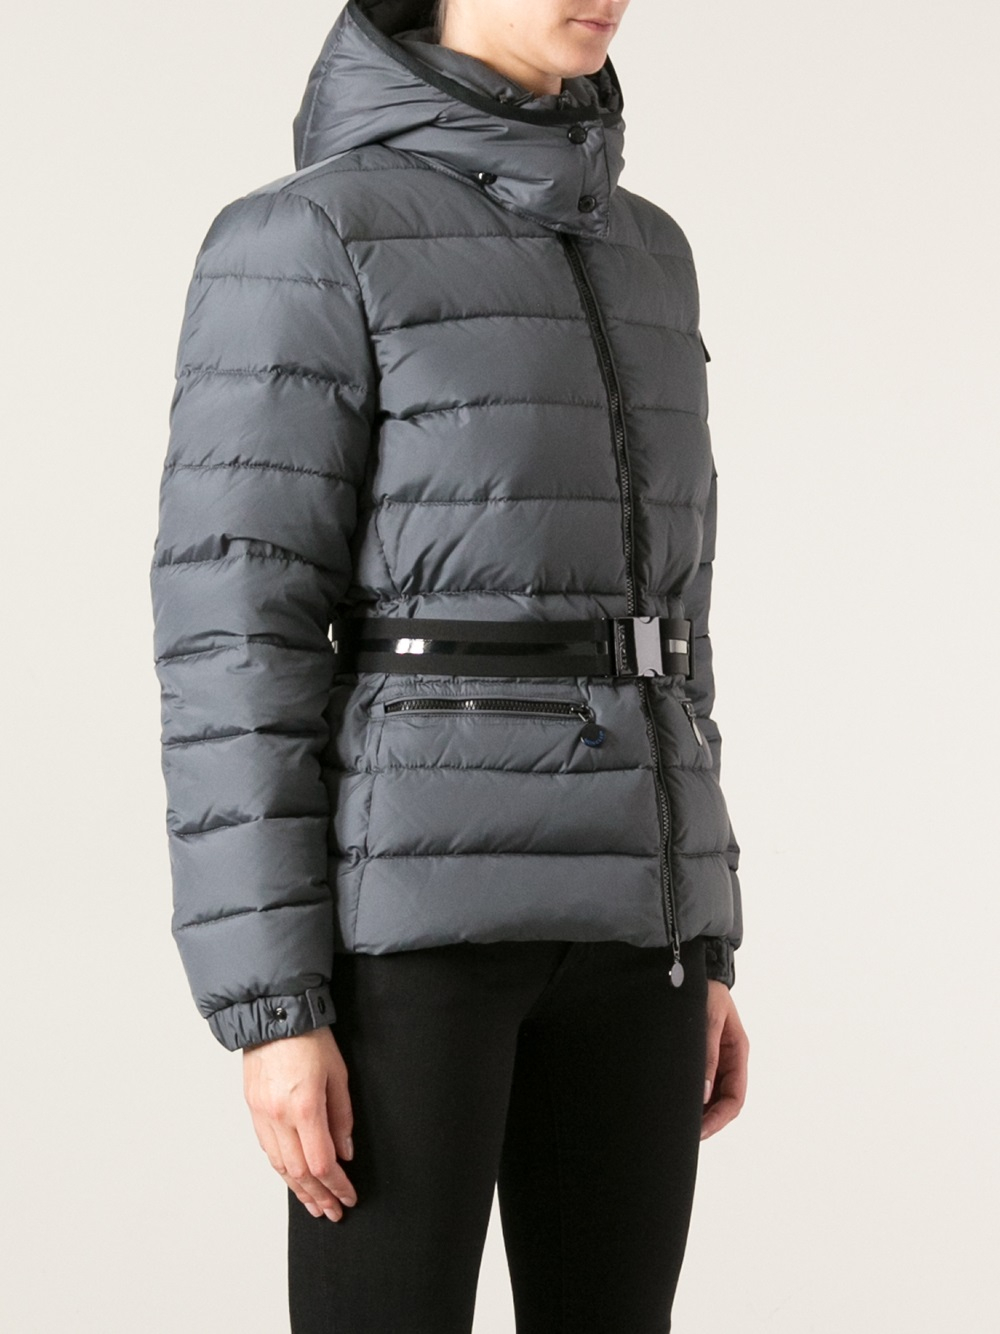 Moncler Bea Padded Jacket in Grey (Gray) - Lyst